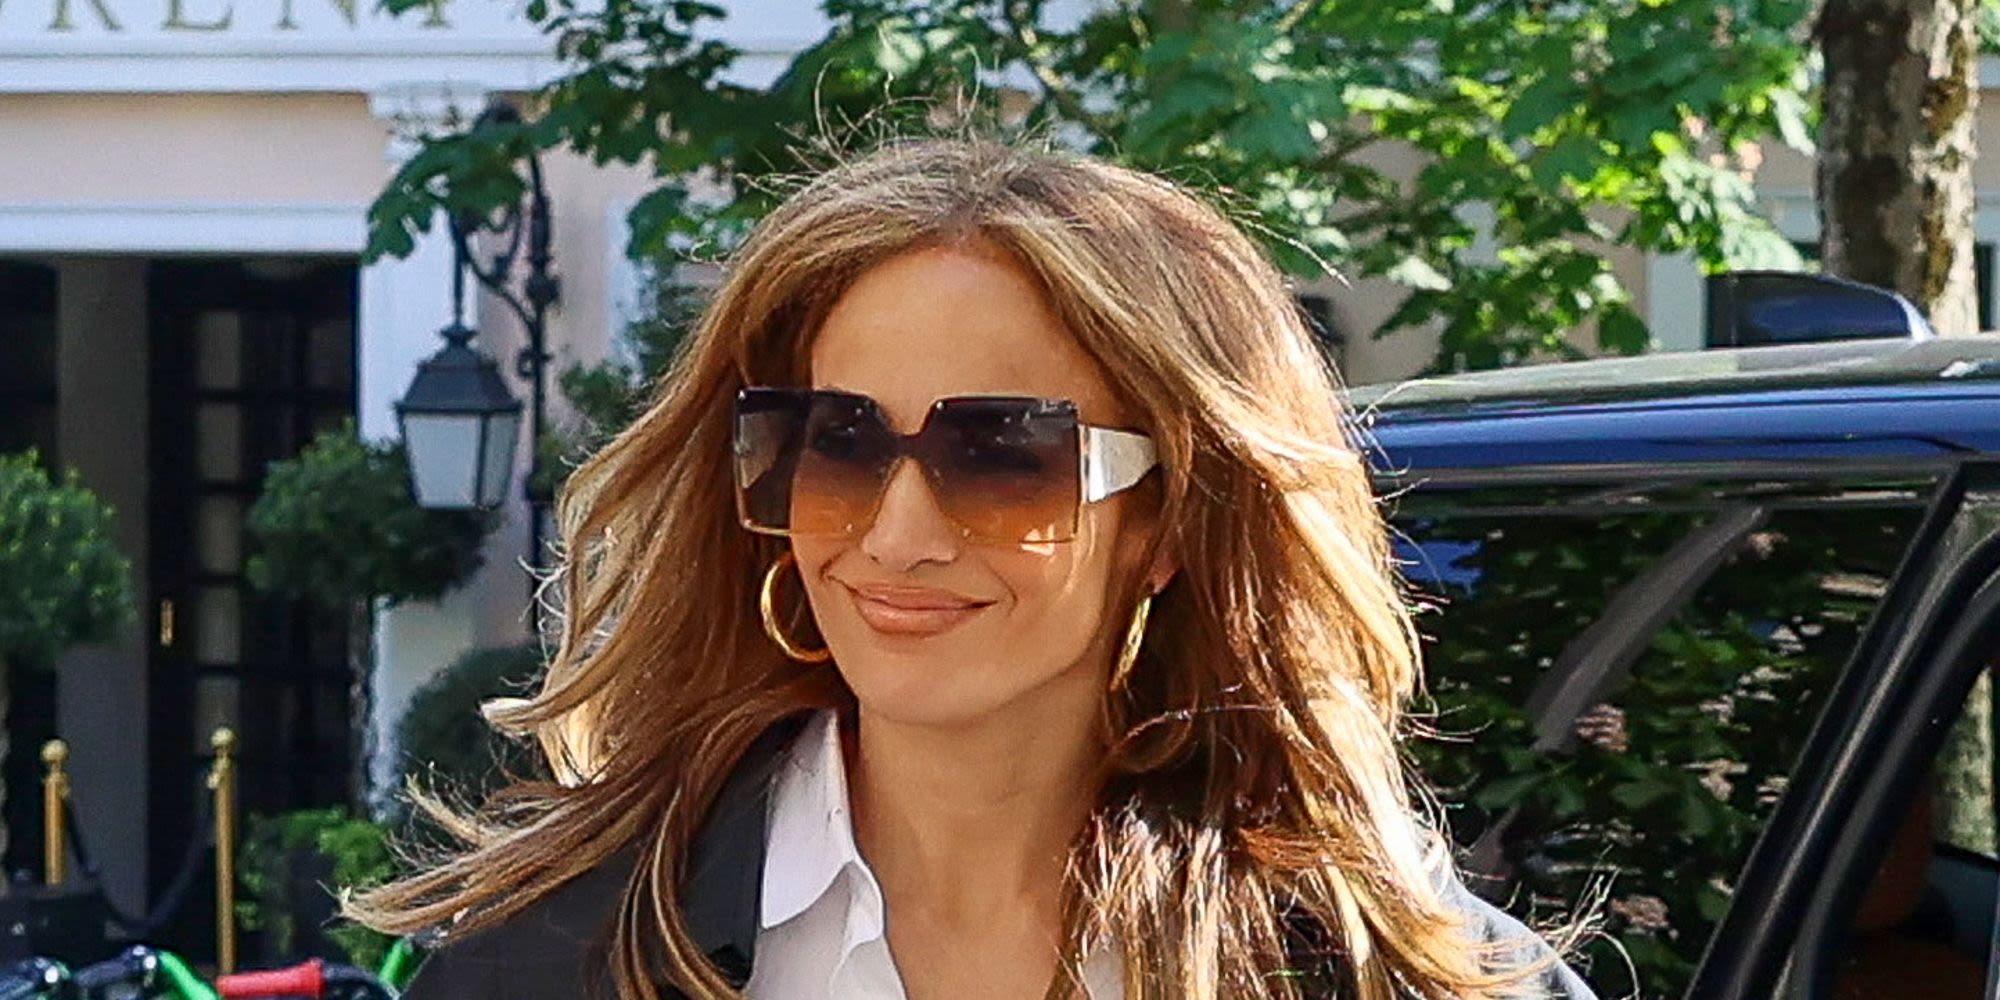 Jennifer Lopez looks like a member of the royal family with this ear-hugging bouffant hairstyle